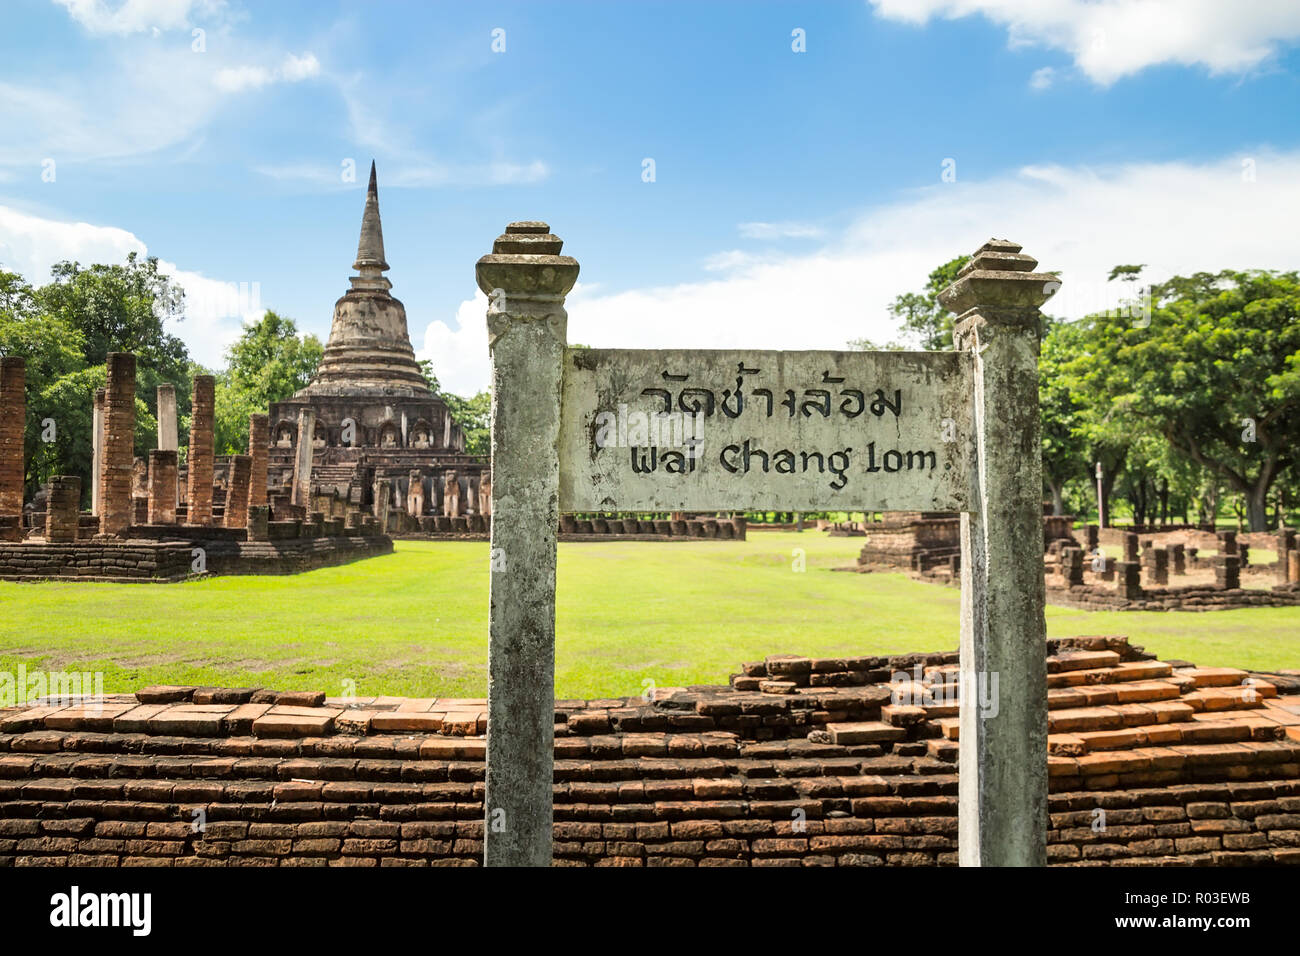 Wat Chang Lom with post in Thai meaning Wat Chang Lom Temple Stock Photo